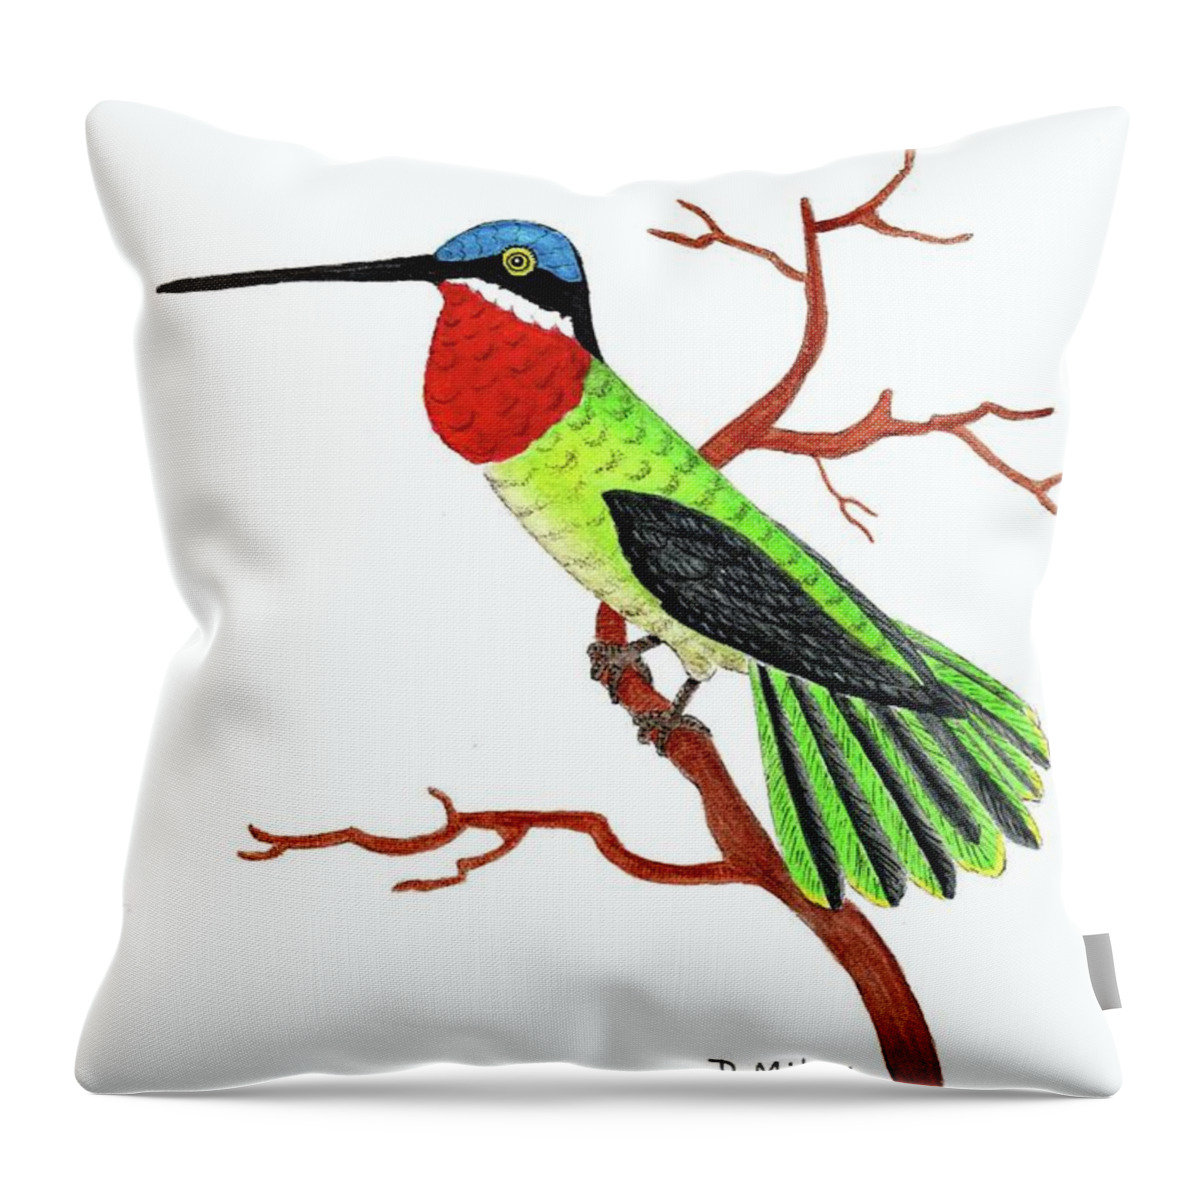 Hummingbird Throw Pillow featuring the painting Colorful Hummingbird Day 4 Challenge by Donna Mibus